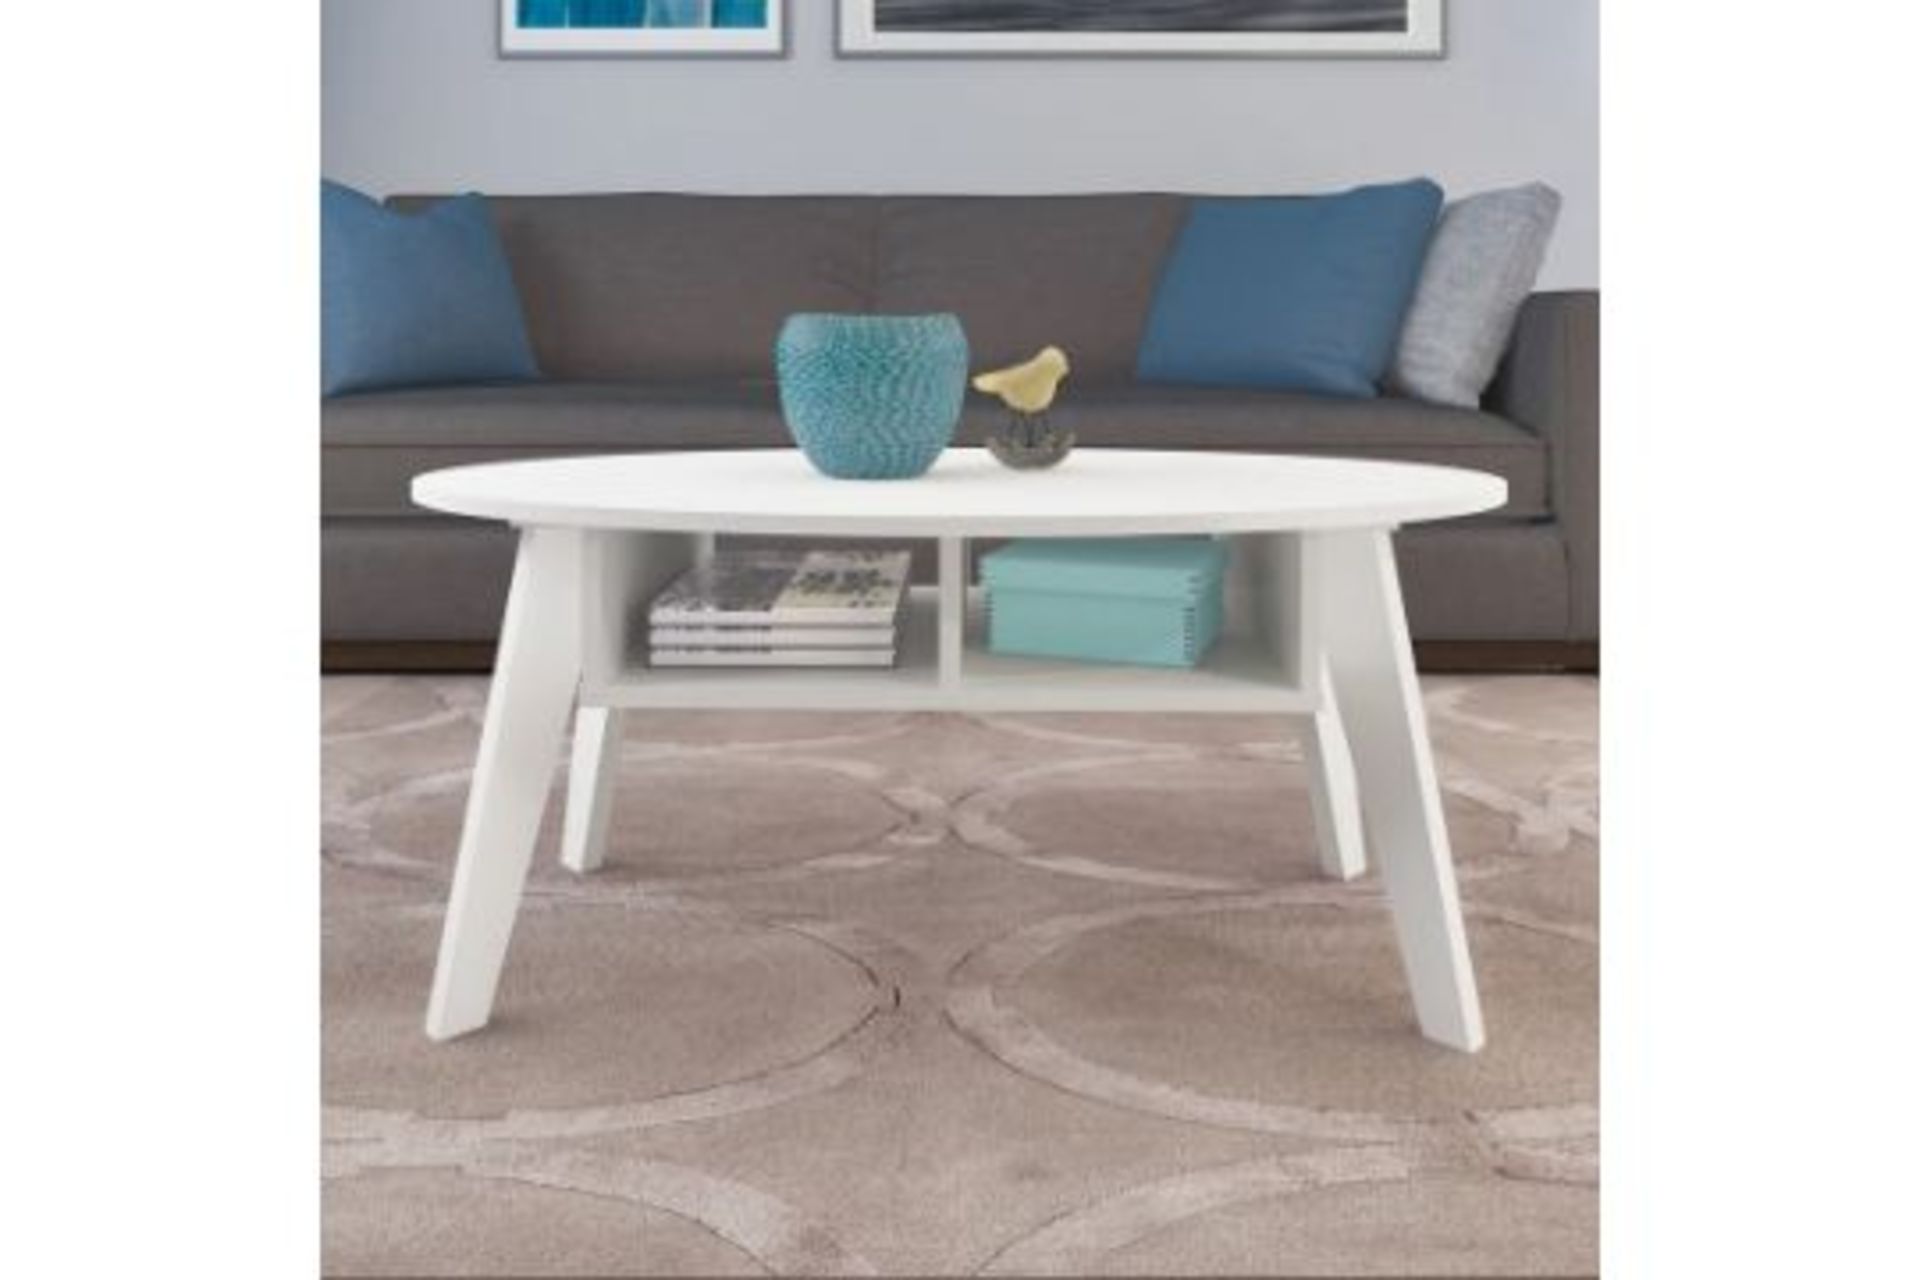 RRP £83.99 - Haillee 4 Legs Coffee Table with Storage